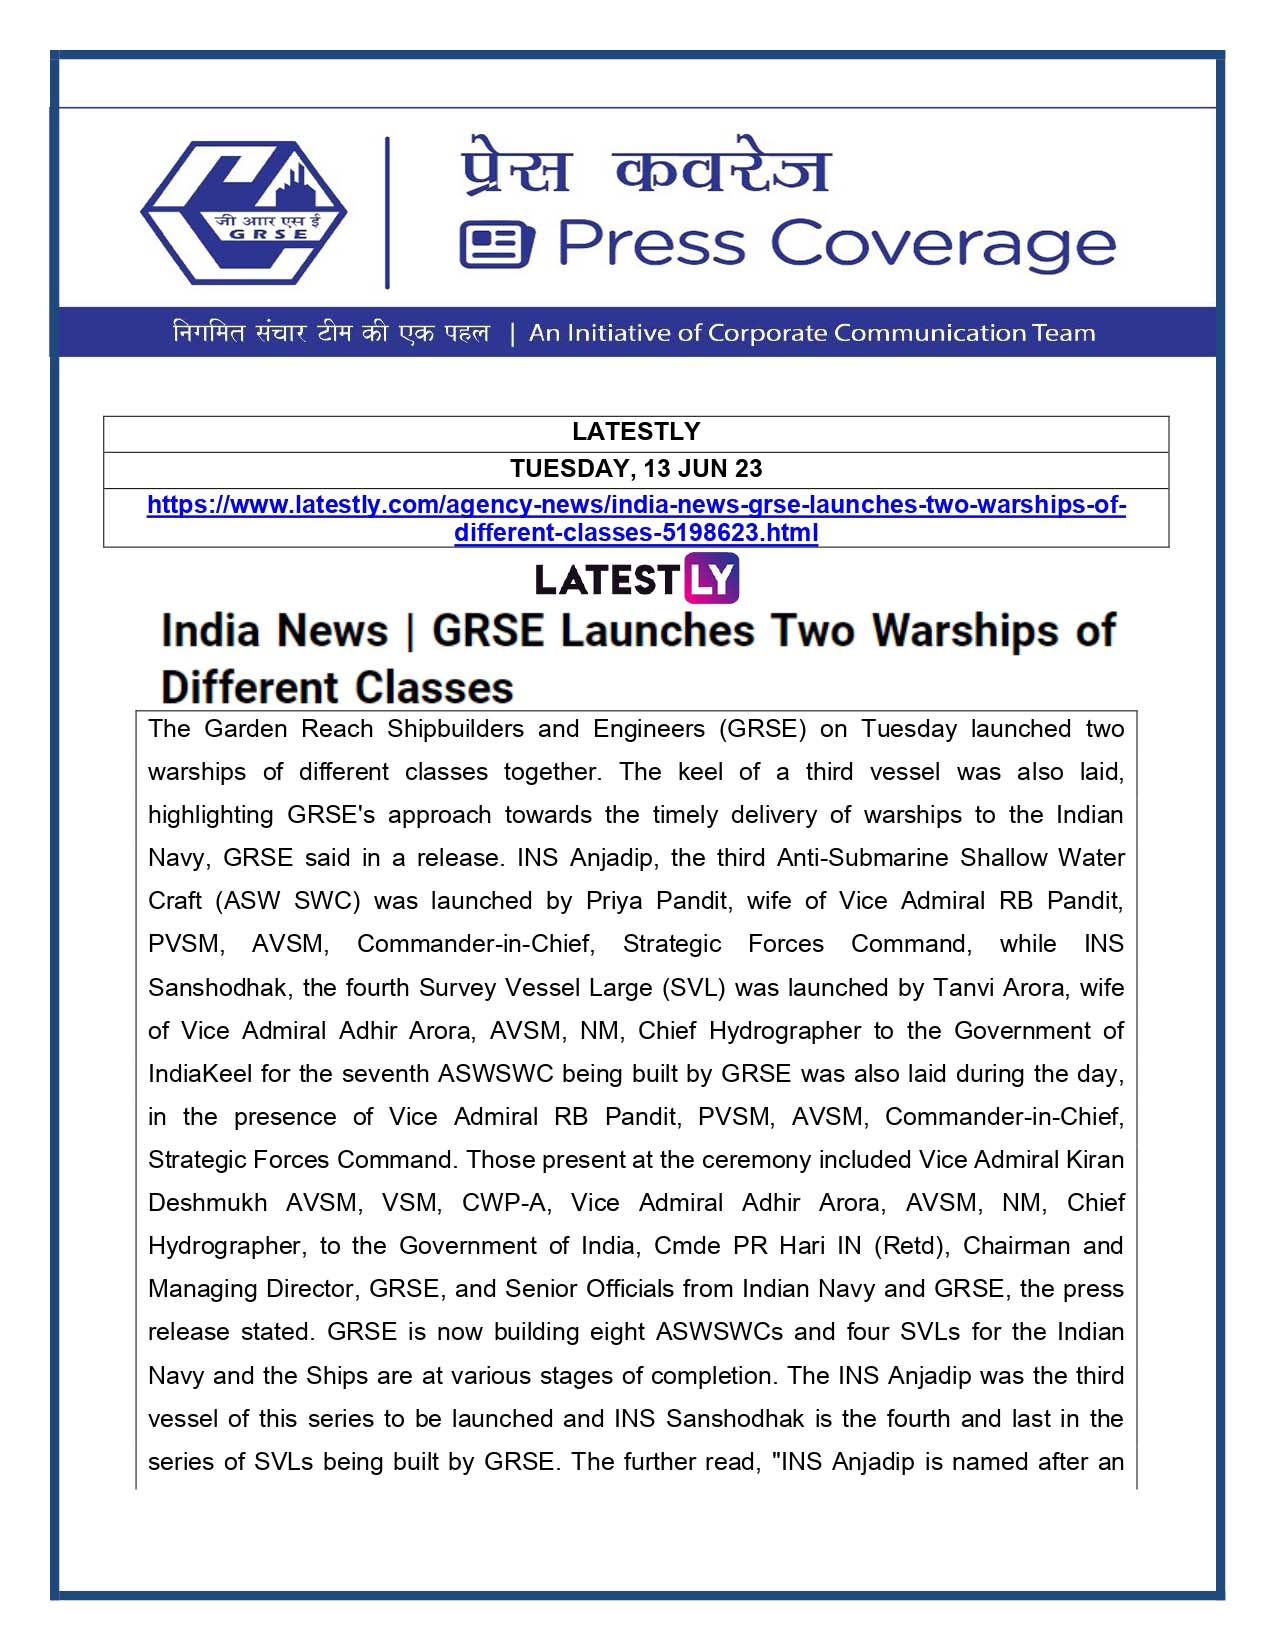 GRSE launches two warships of different classes